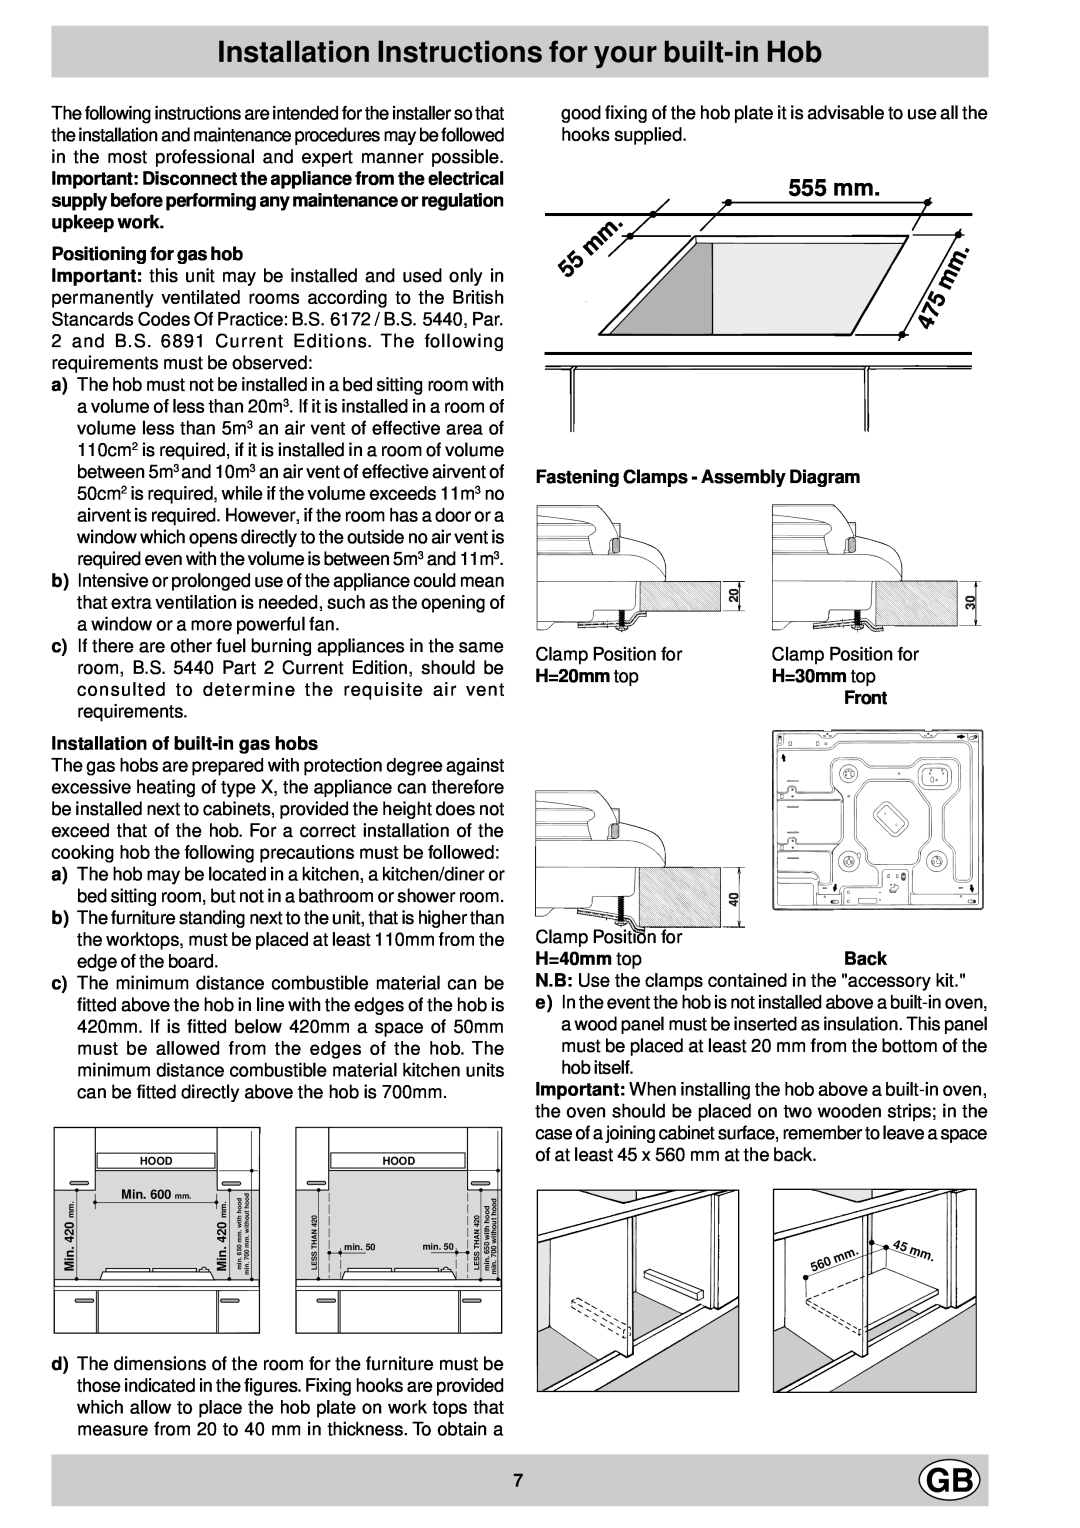 Hotpoint G640 Installation Instructions for your built-in Hob, 555 mm, Positioning for gas hob, H=20mm top, H=30mm top 